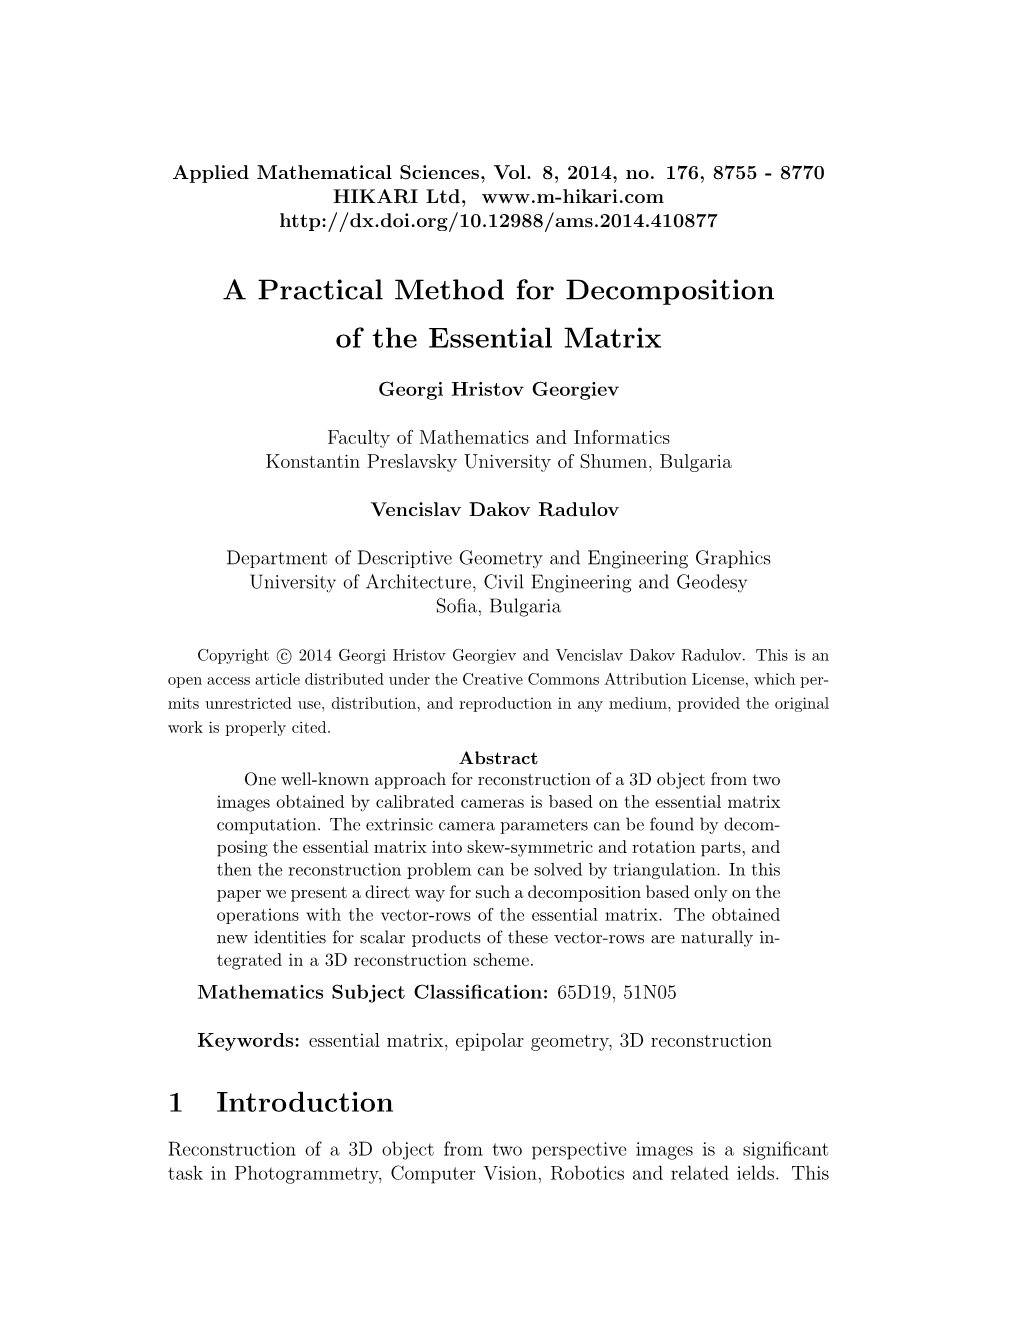 A Practical Method for Decomposition of the Essential Matrix 1 Introduction